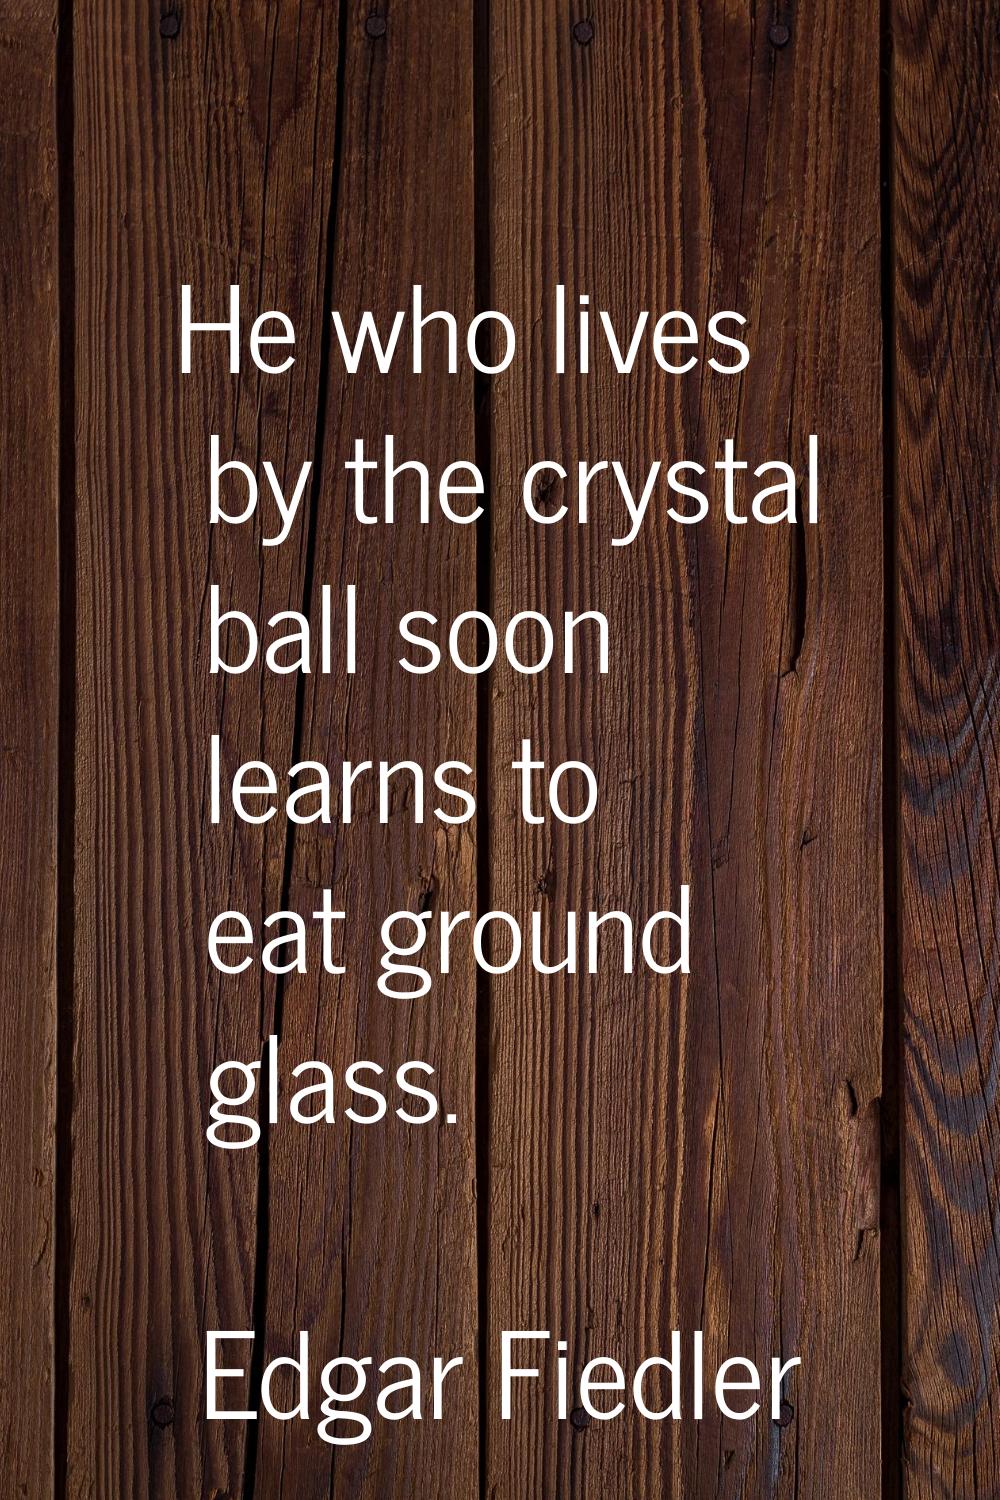 He who lives by the crystal ball soon learns to eat ground glass.